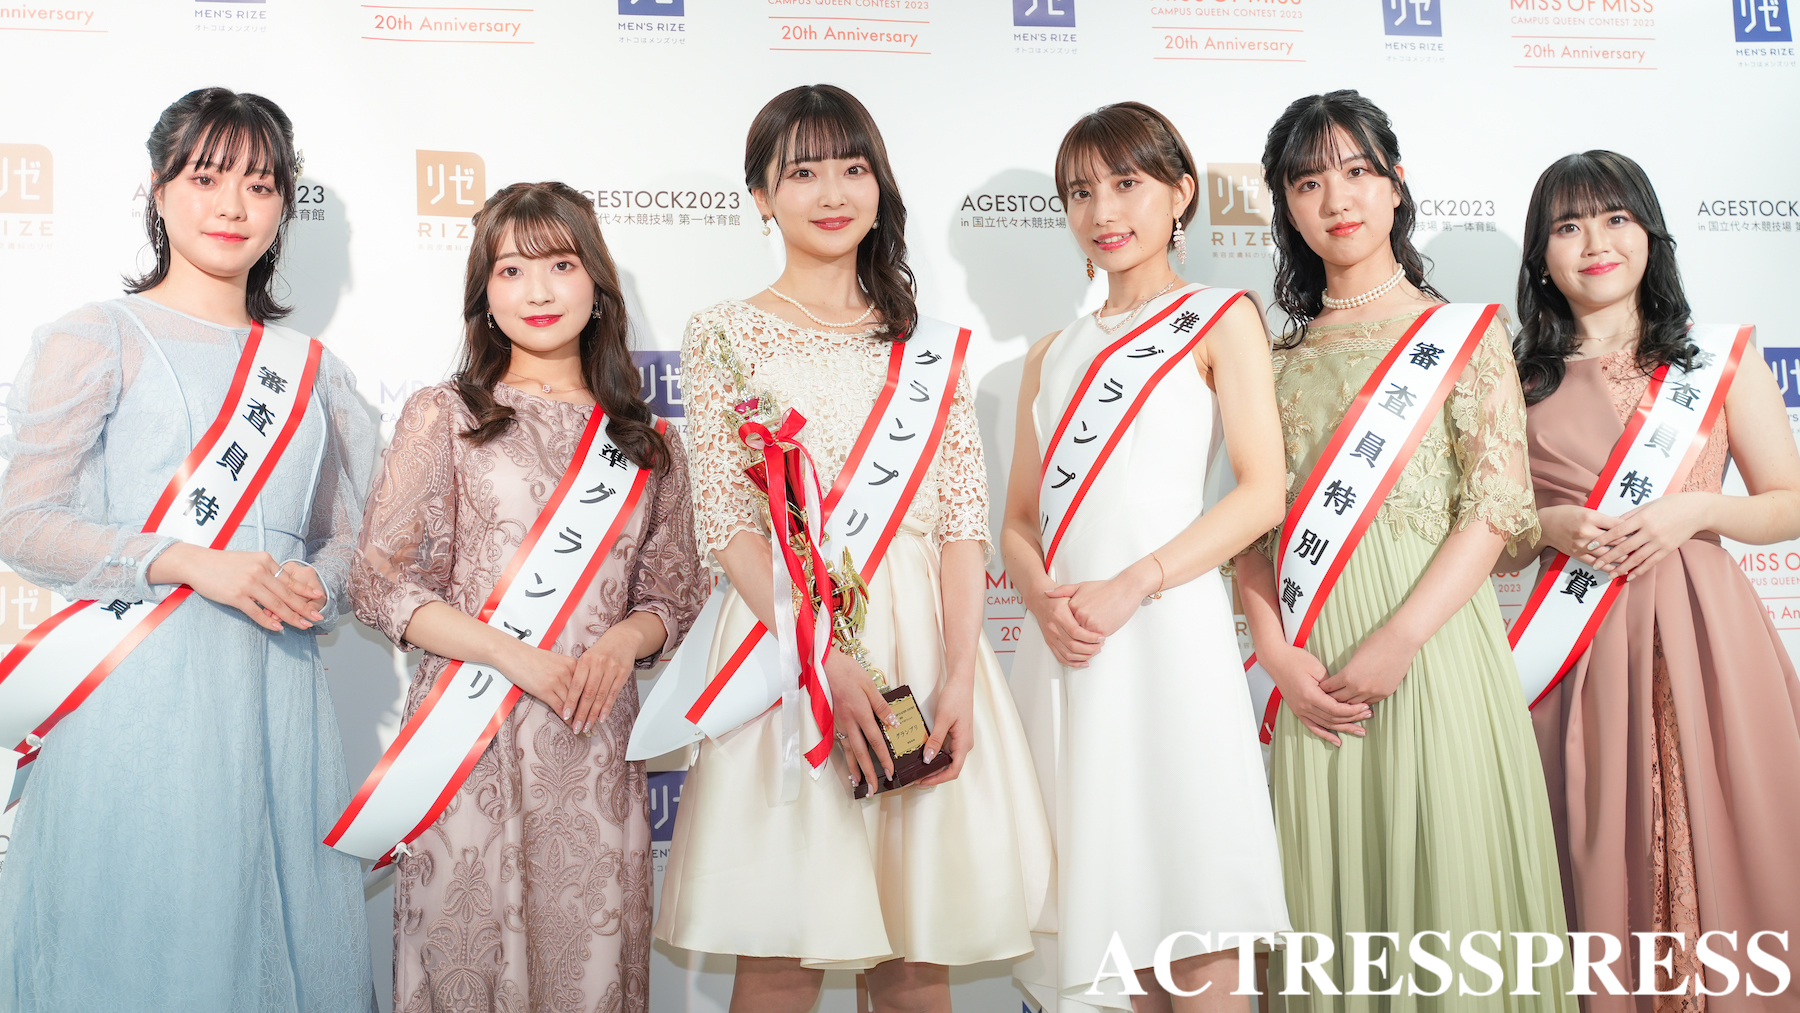 「MISS OF MISS CAMPUS QUEEN CONTEST 2023」受賞者／2023年3月5日、国立代々木競技場第一体育館にて。撮影：ACTRESS PRESS編集部